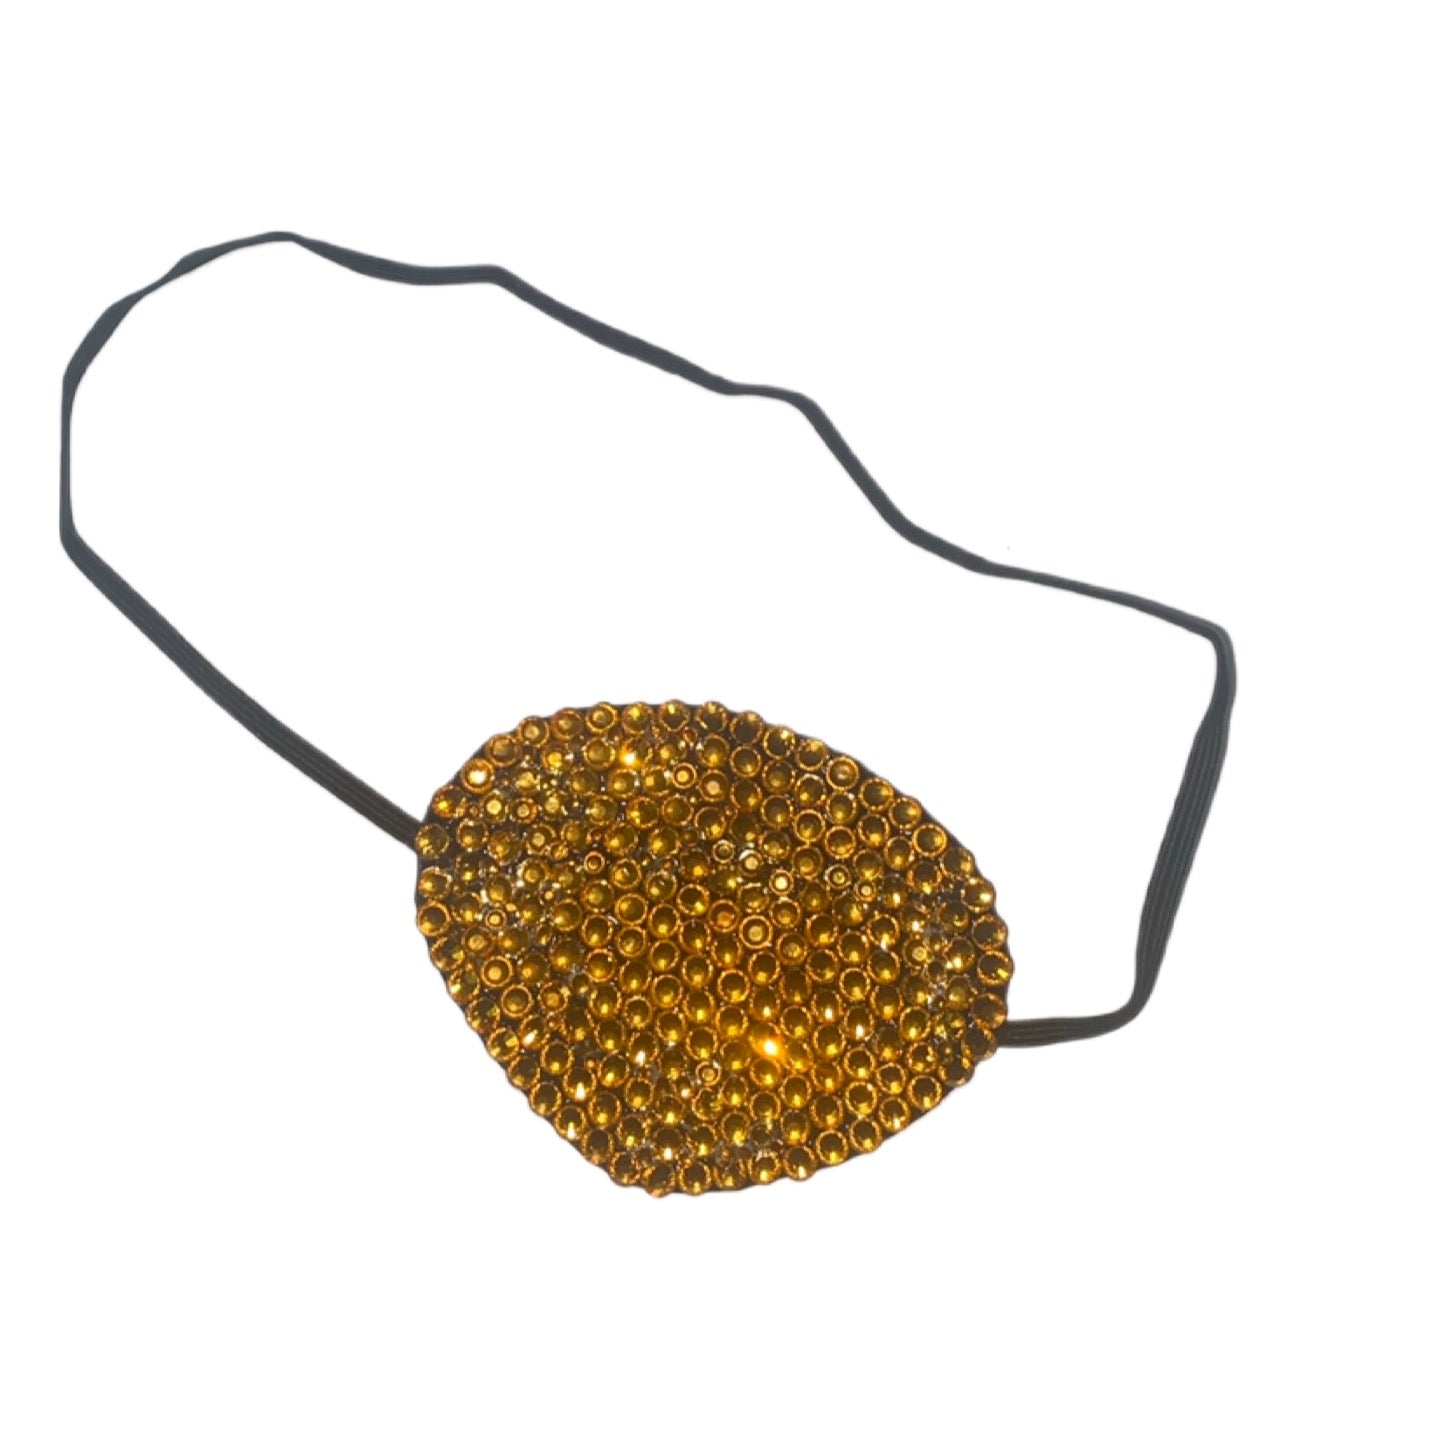 Black Eye Patch Bedazzled In Topaz Gold Luxe Crystal